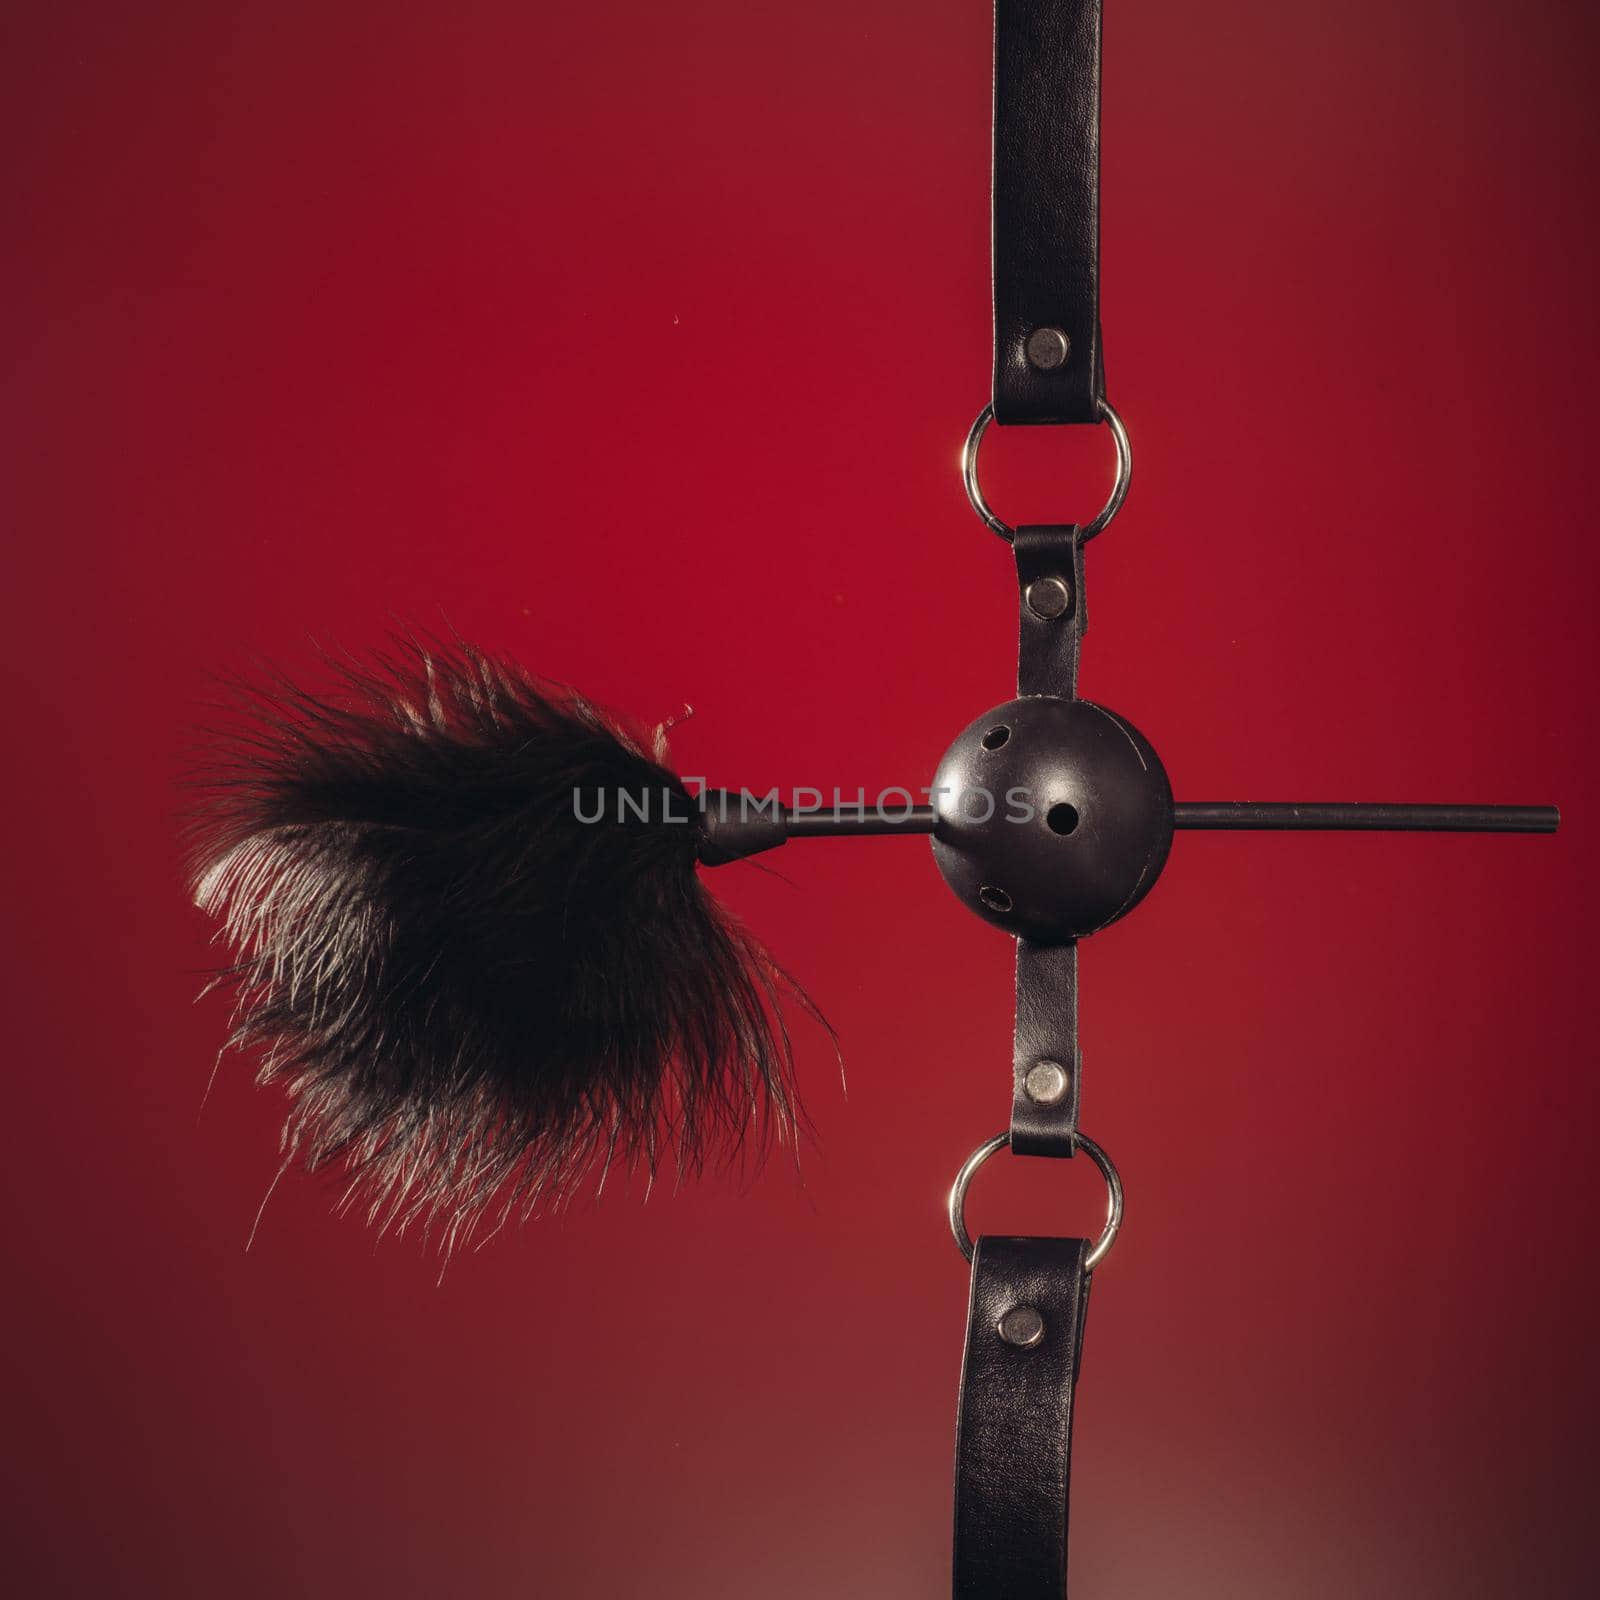 Feathered and ball gag fetish equipment isolated on red background - Image by zartarn